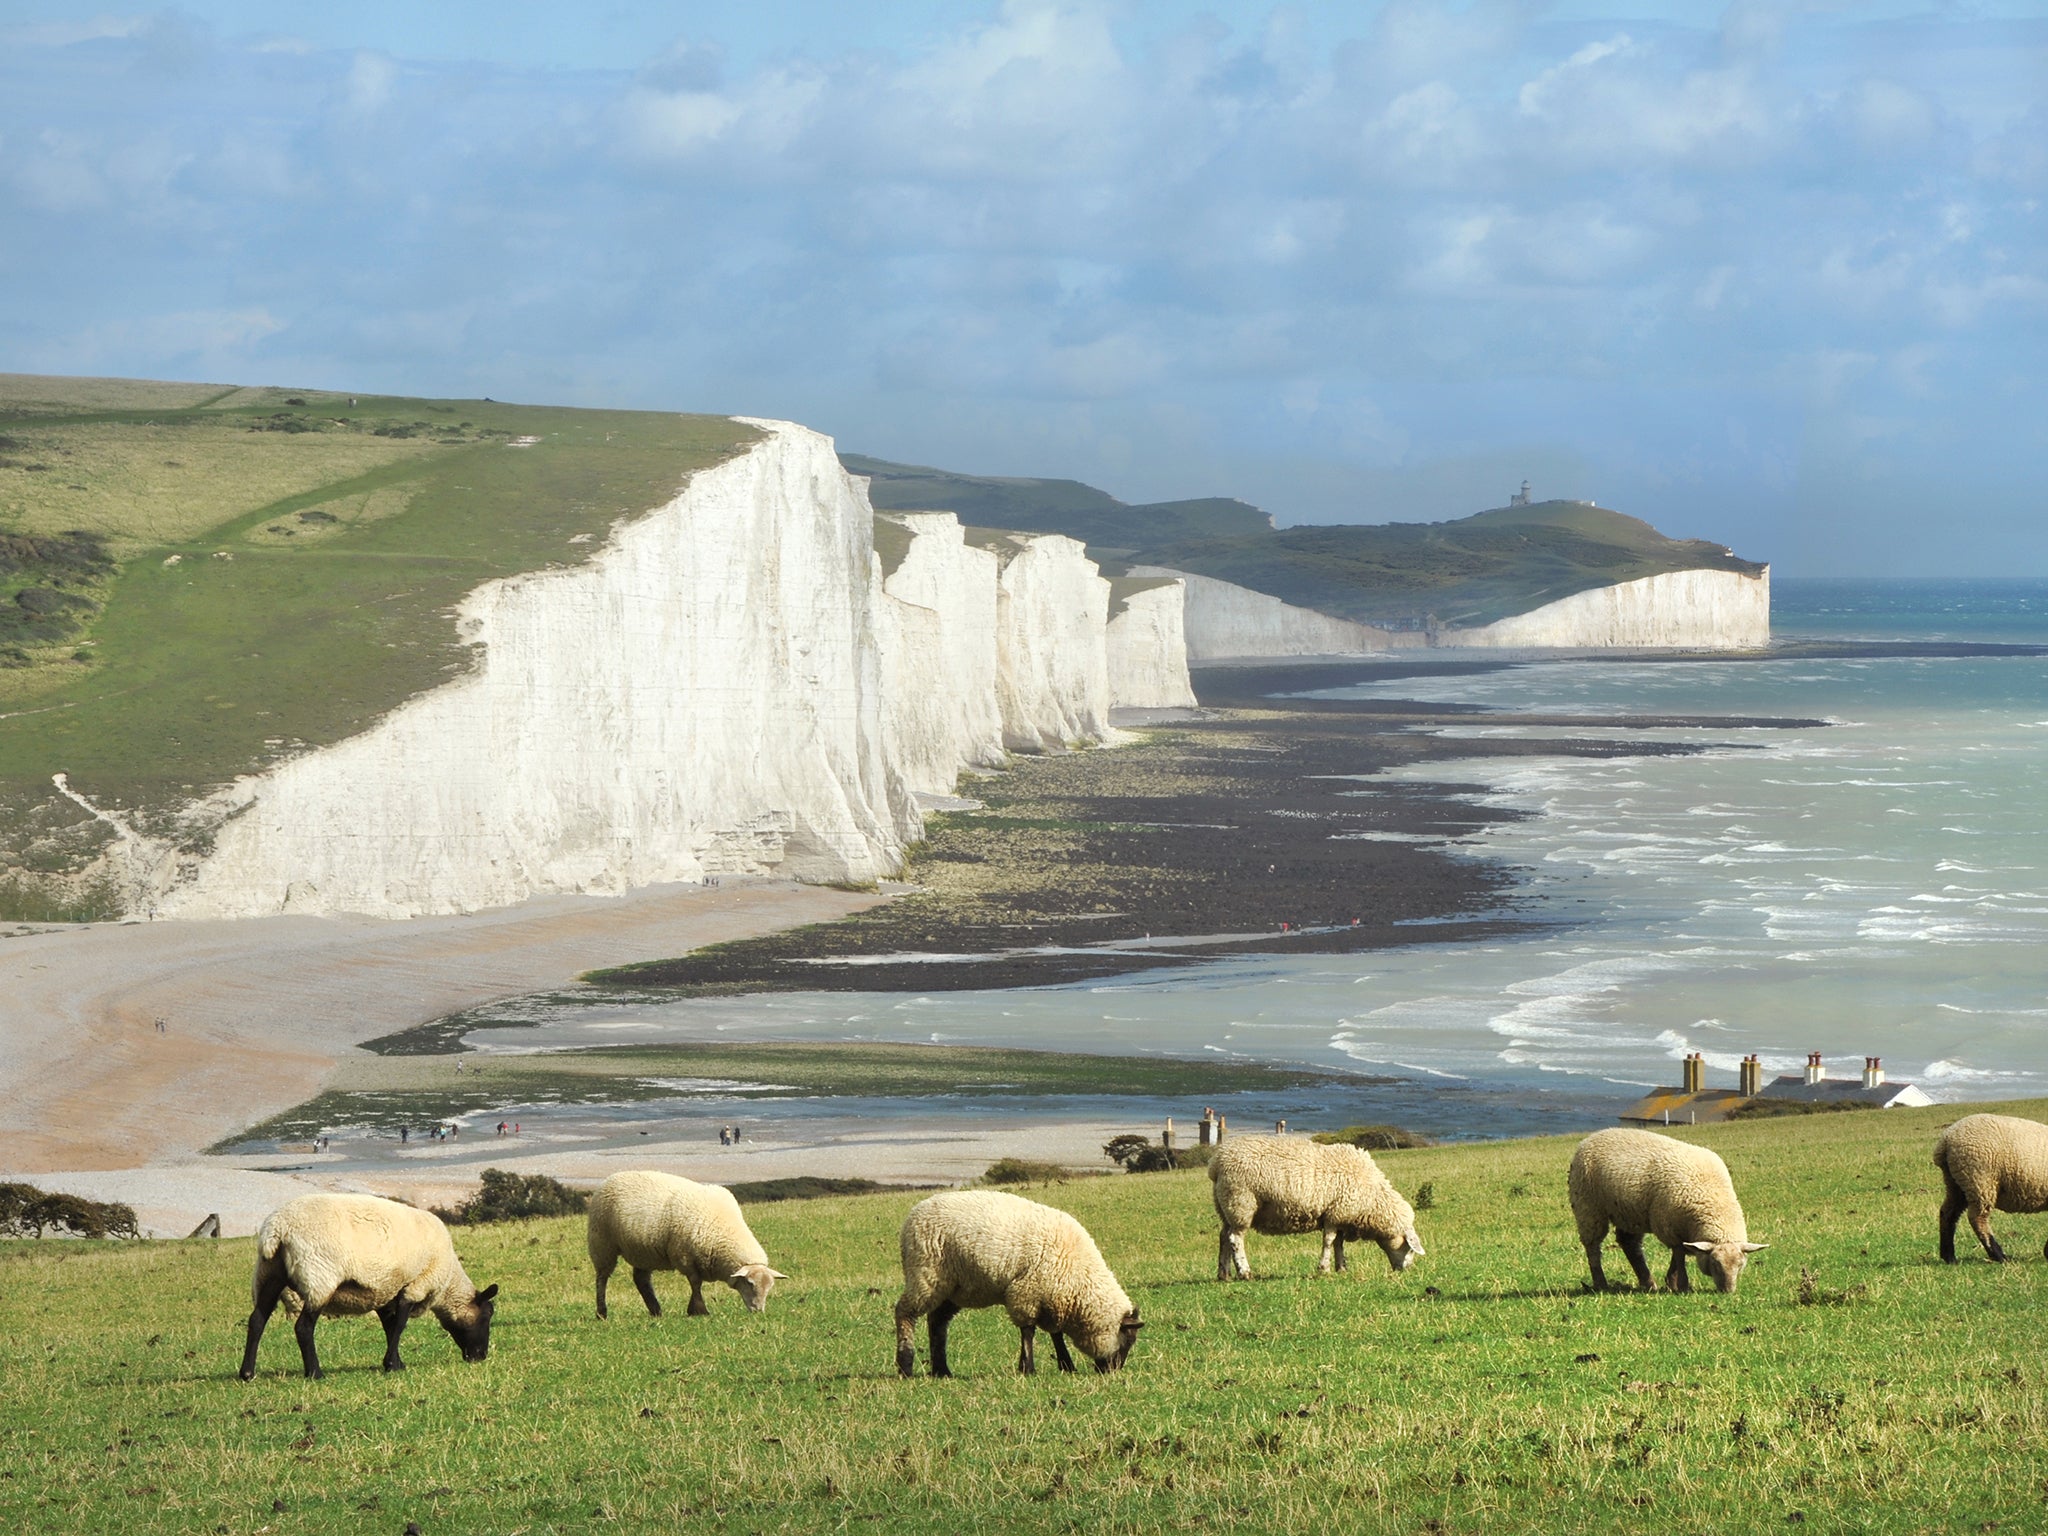 The Seven Sister cliffs on the South Downs overlooking the English Channel